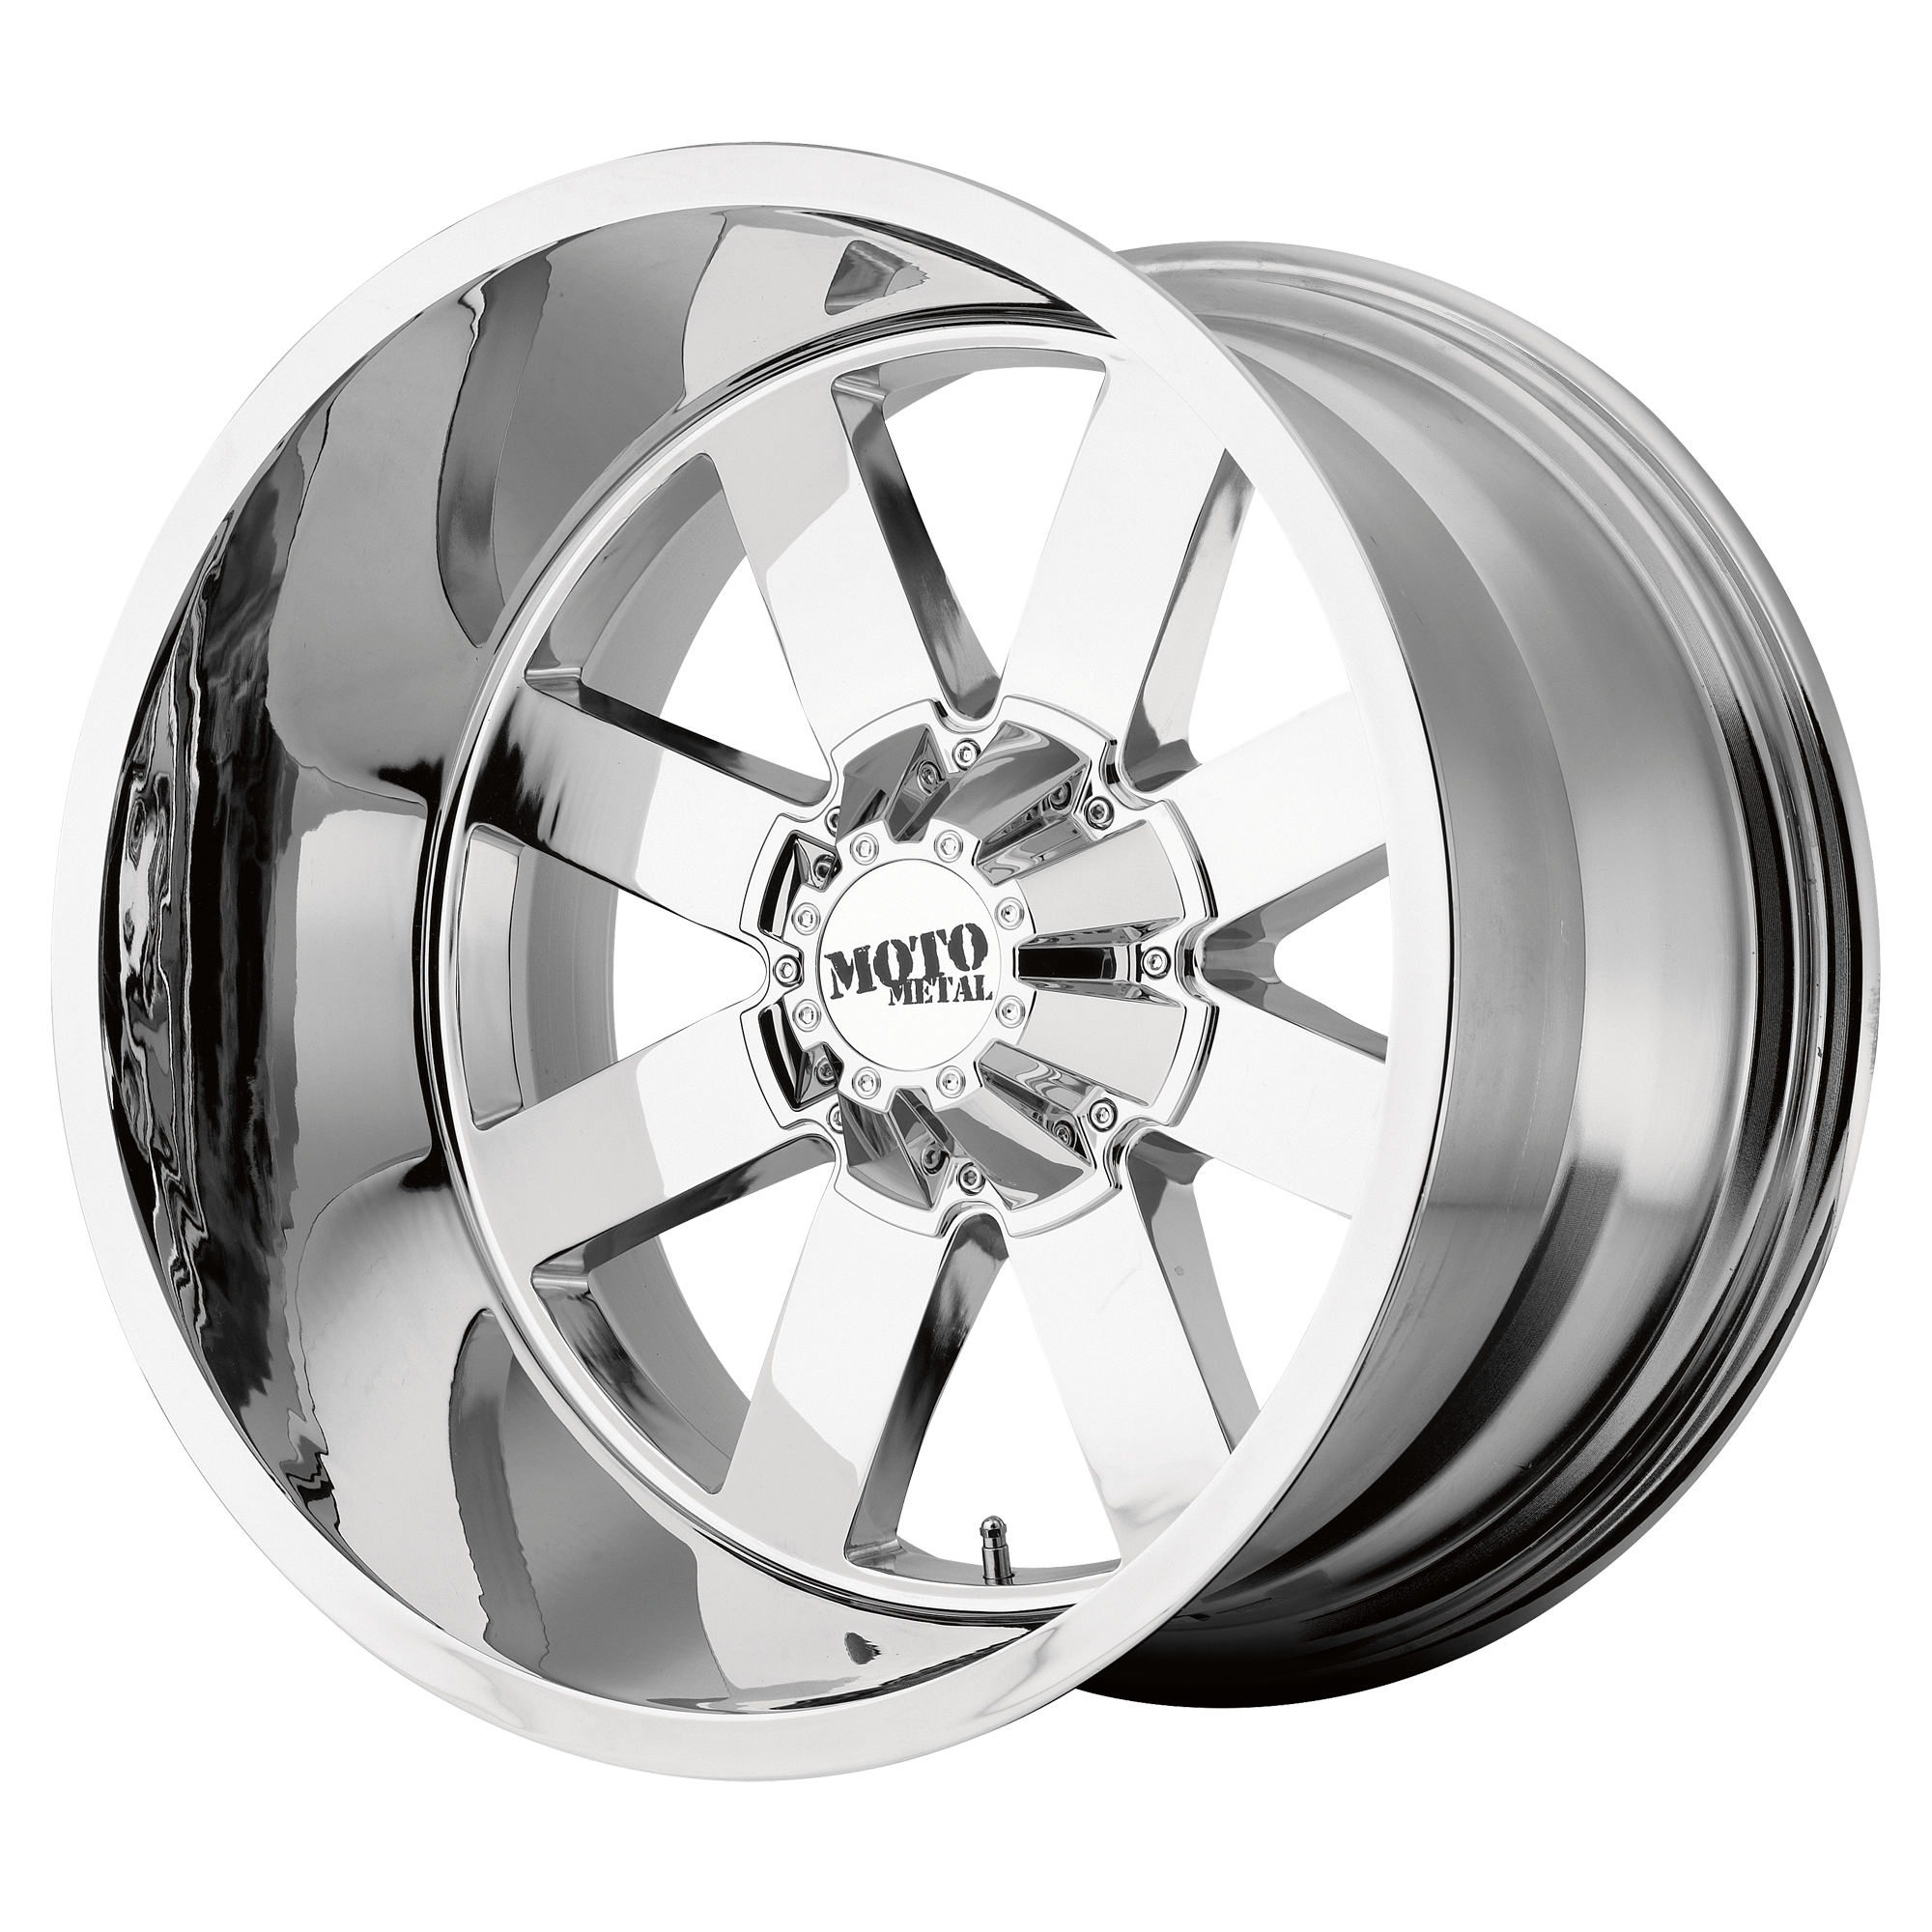 MO962 20x12 8x180.00 CHROME (-44 mm) - Tires and Engine Performance